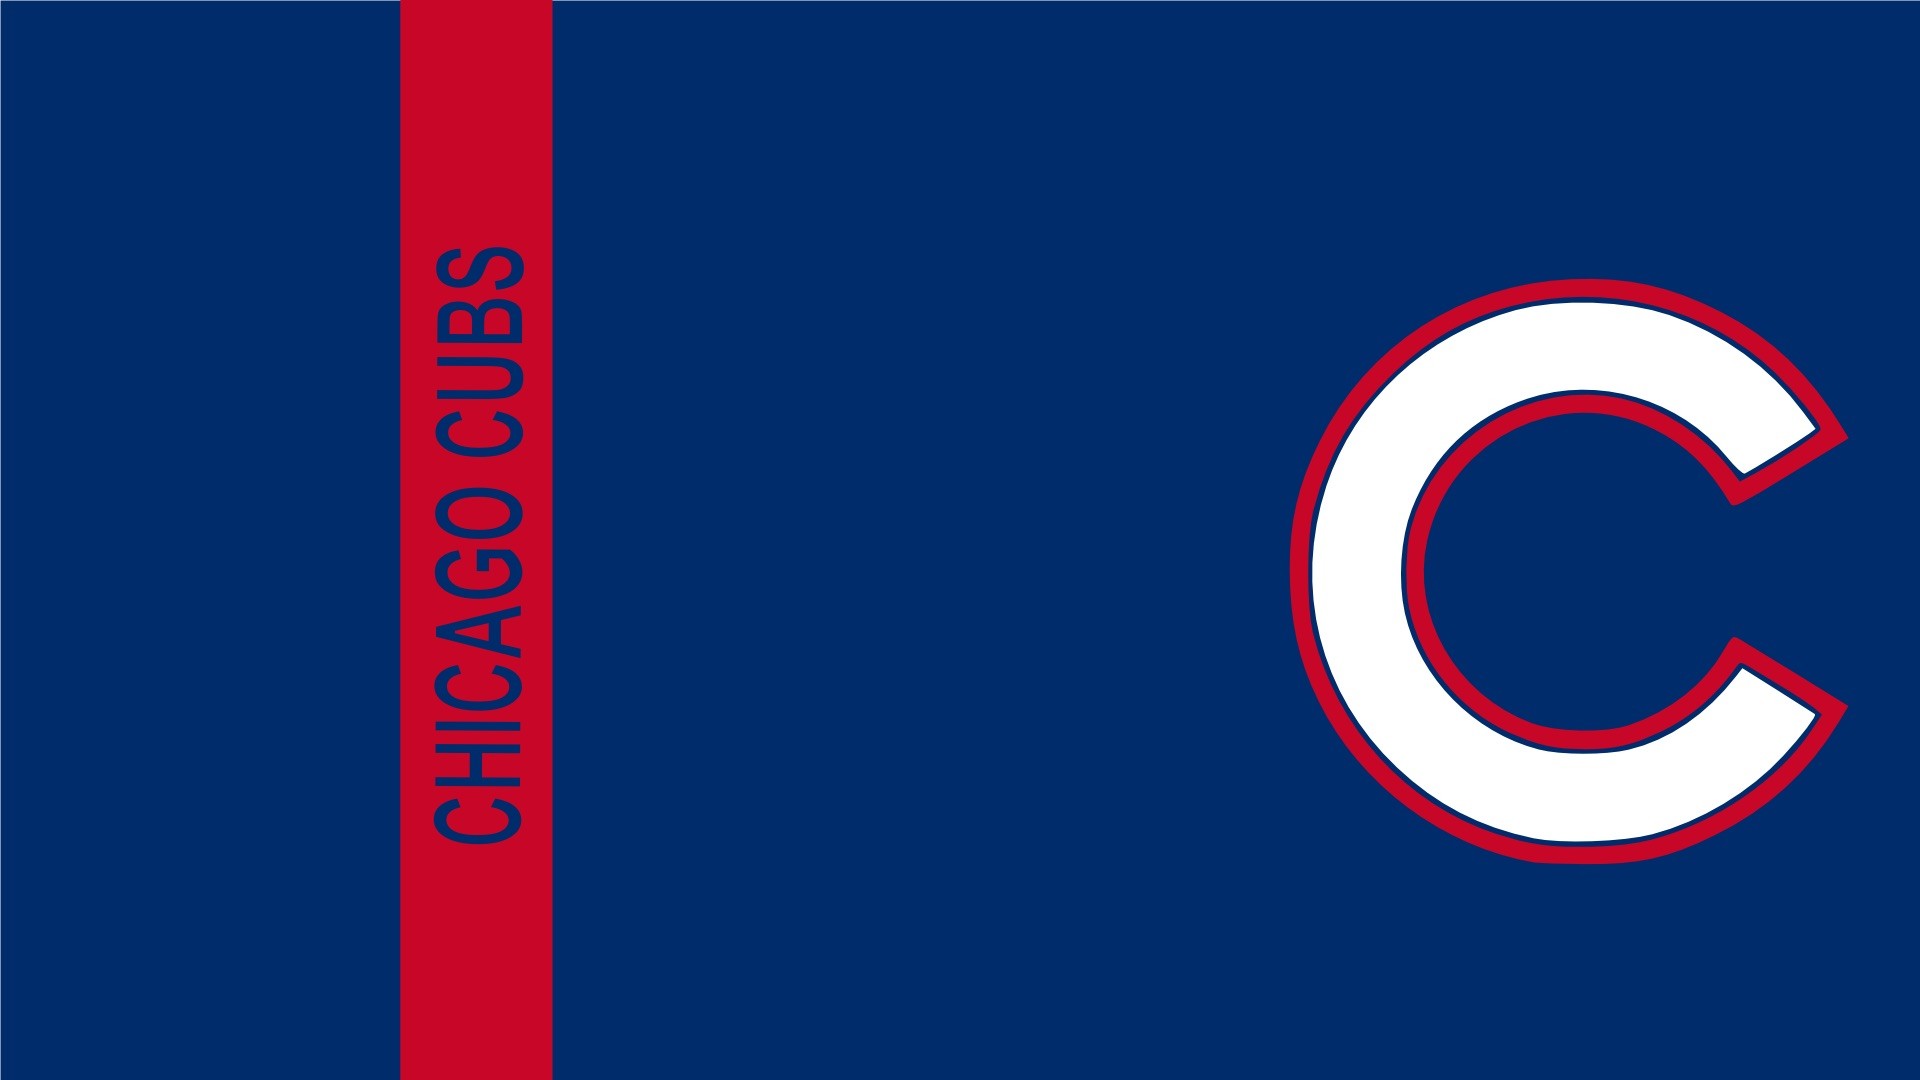 1920x1080 Cubs Flags Wallpaper Free - Android Apps on Google Play